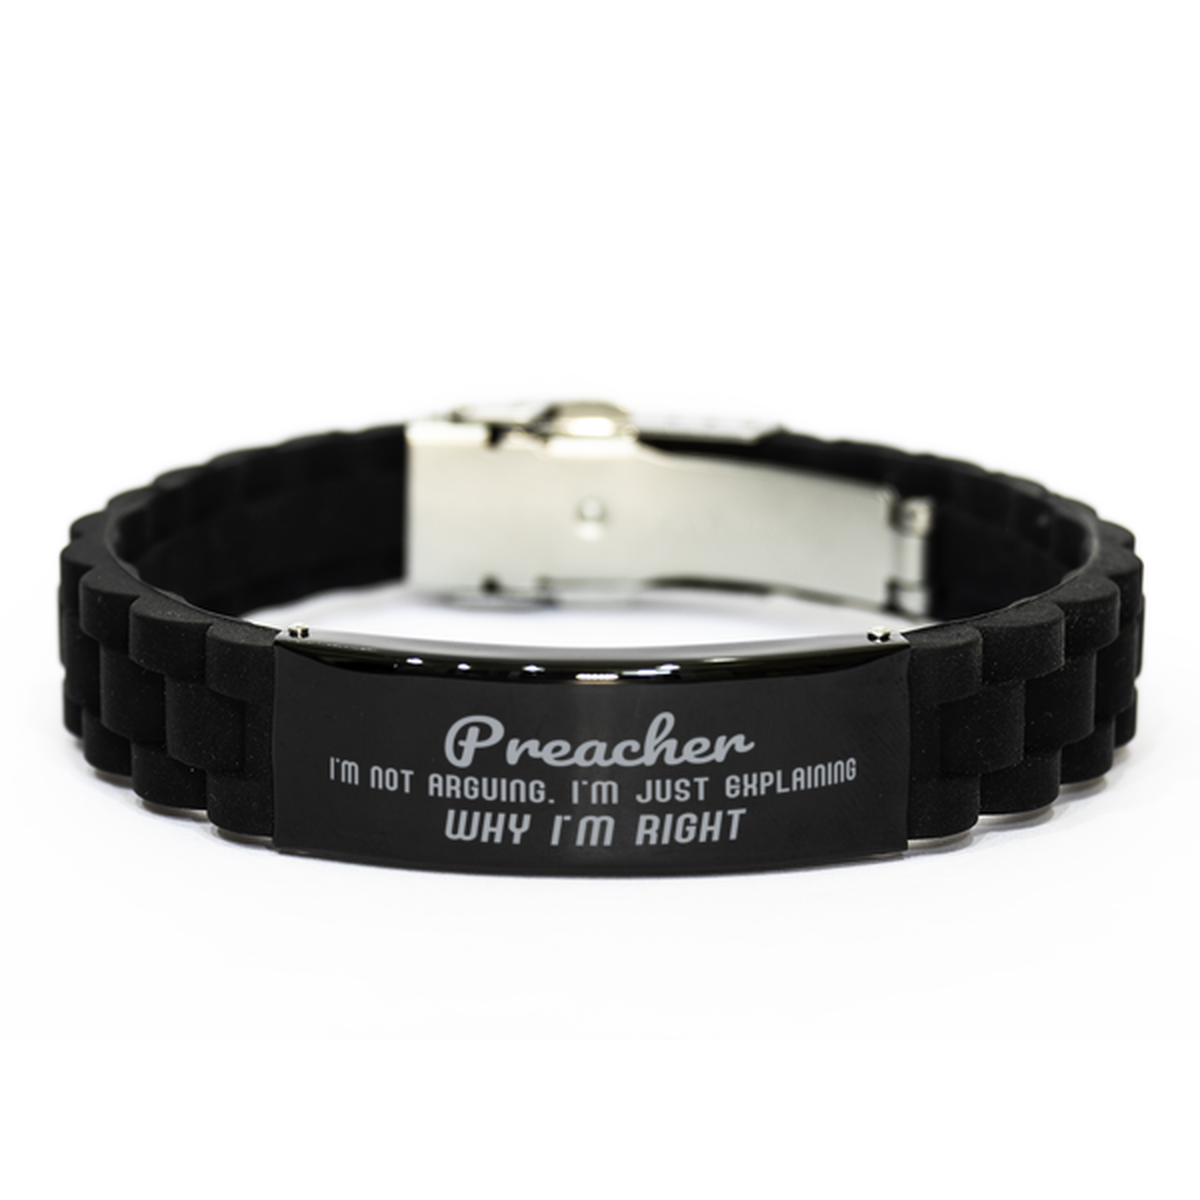 Preacher I'm not Arguing. I'm Just Explaining Why I'm RIGHT Black Glidelock Clasp Bracelet, Funny Saying Quote Preacher Gifts For Preacher Graduation Birthday Christmas Gifts for Men Women Coworker